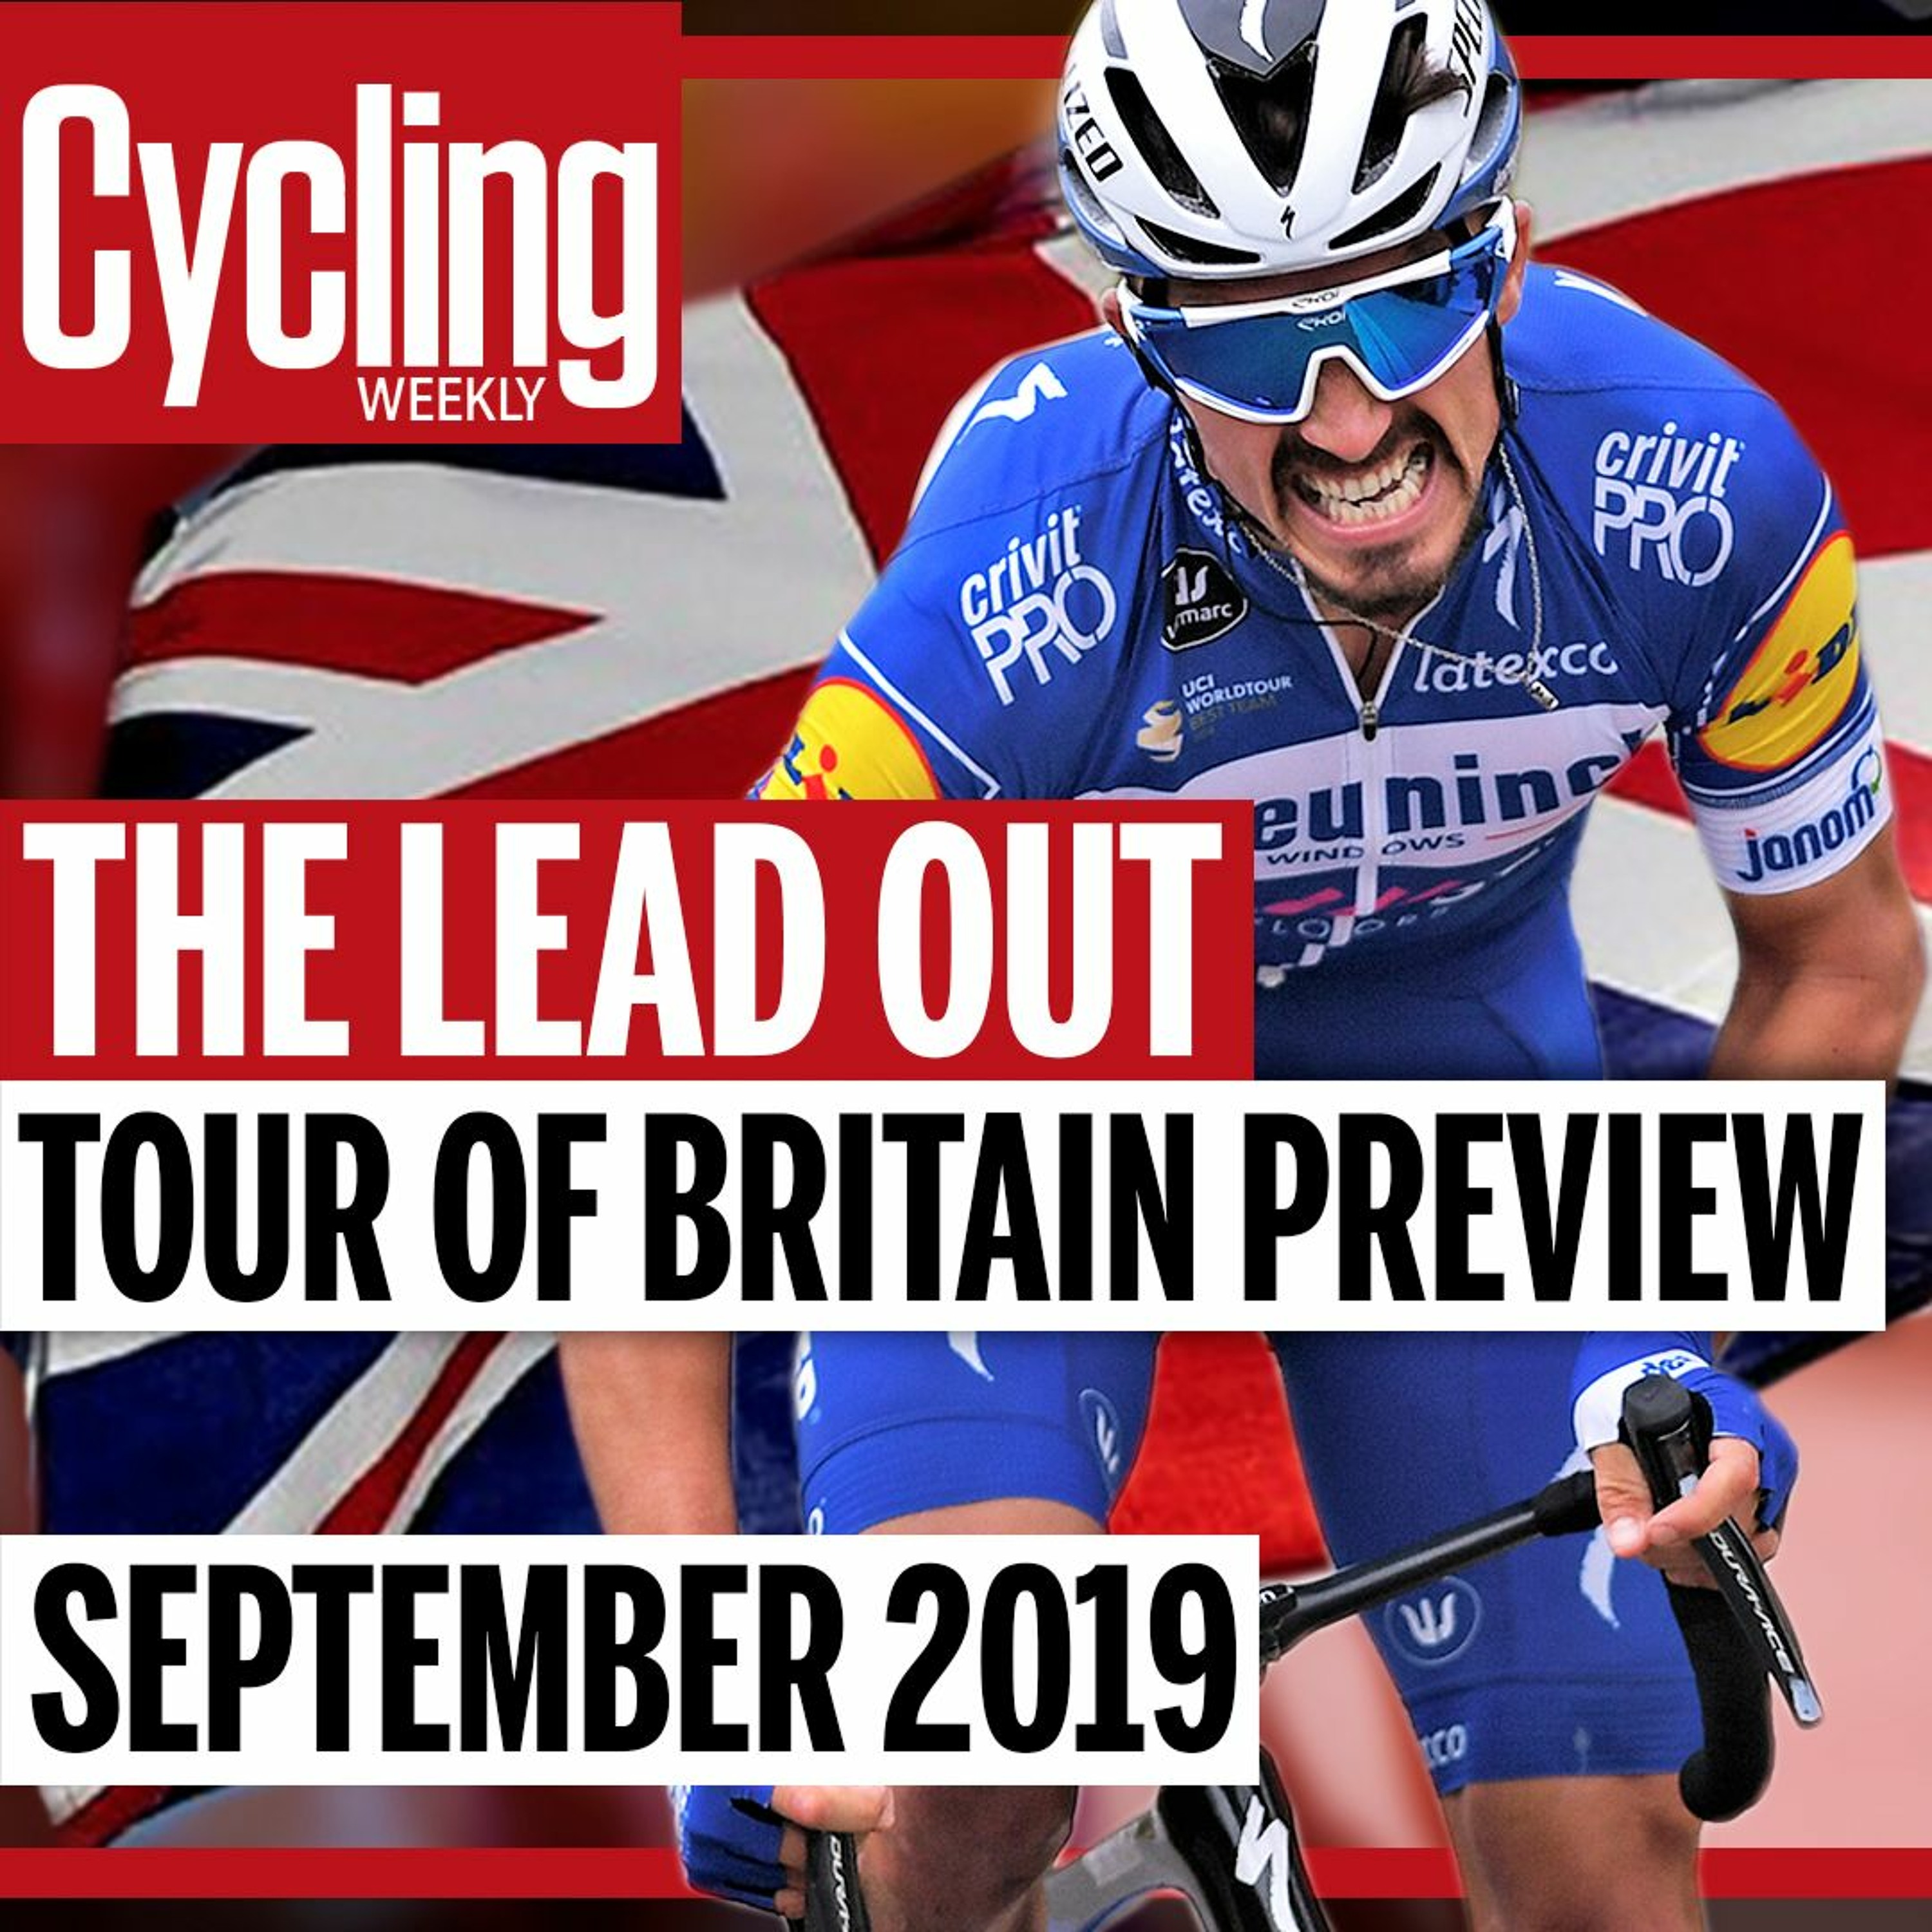 Tour of Britain 2019 preview | The Lead Out | Cycling Weekly